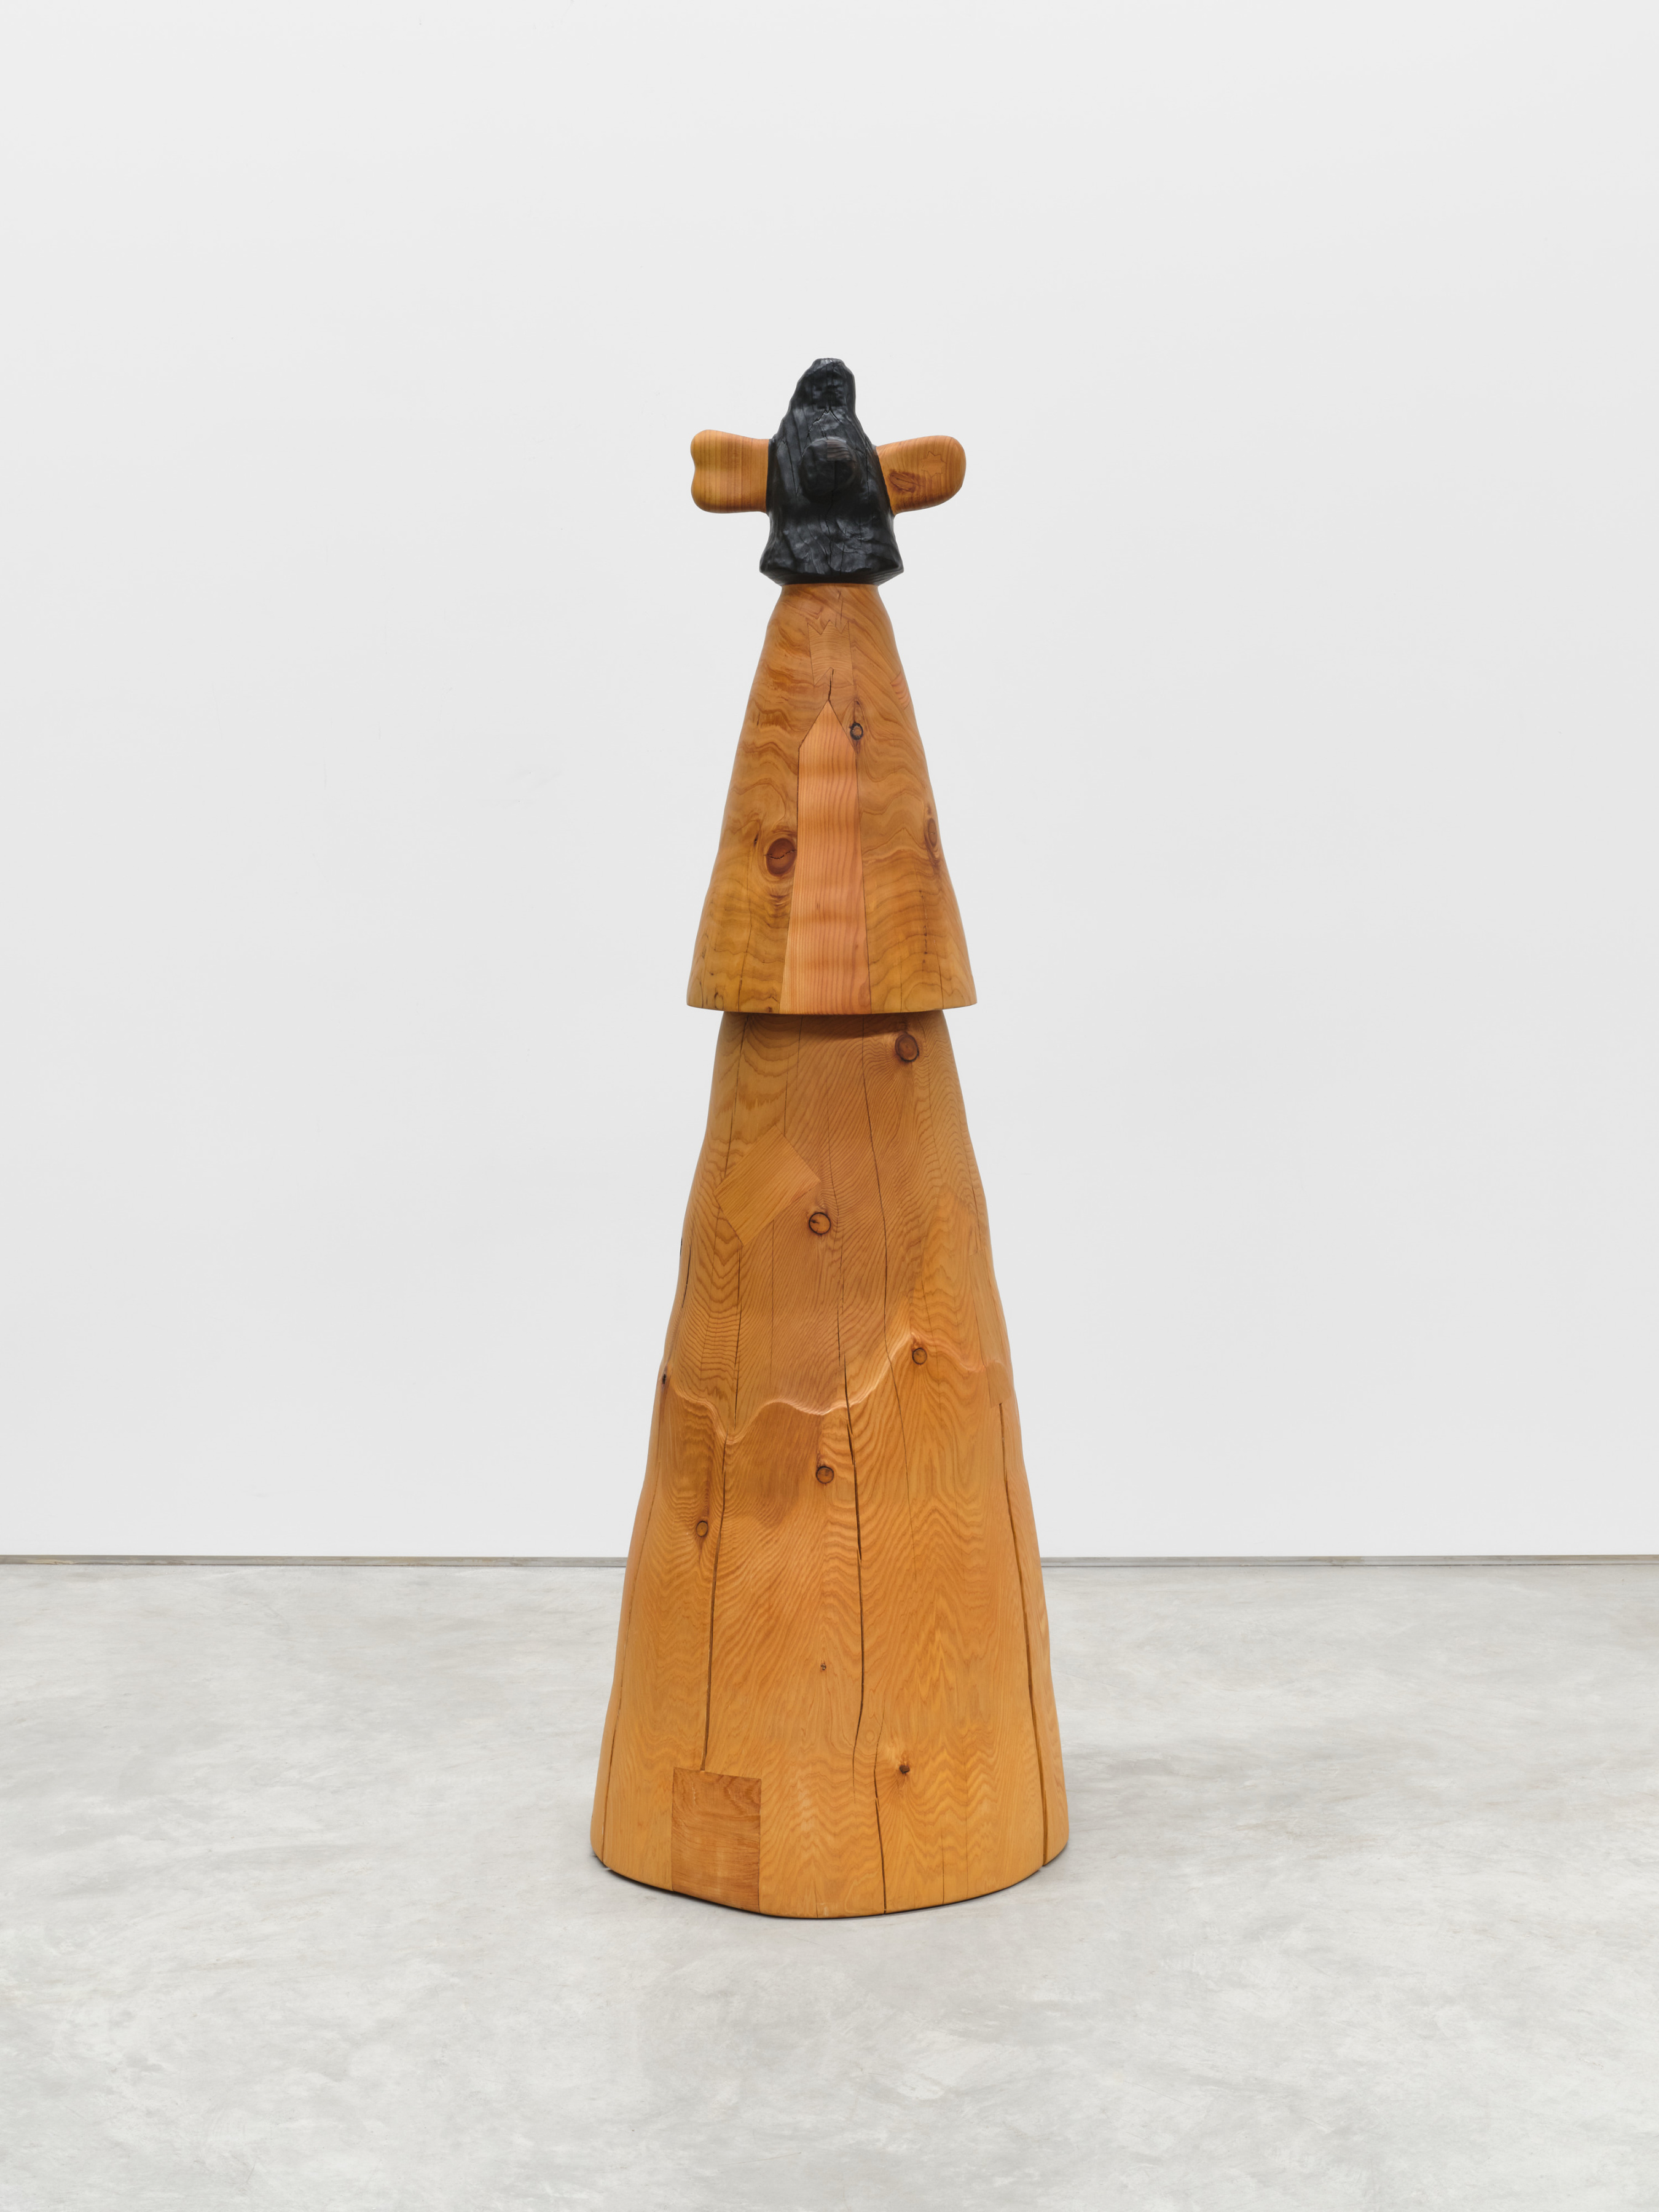 A three tiered carved wooden sculpture at human scale with a large cone shaped base, a smaller cone shaped center and a blackened cone shaped top with two oblong protrusions in a natural wood grain.